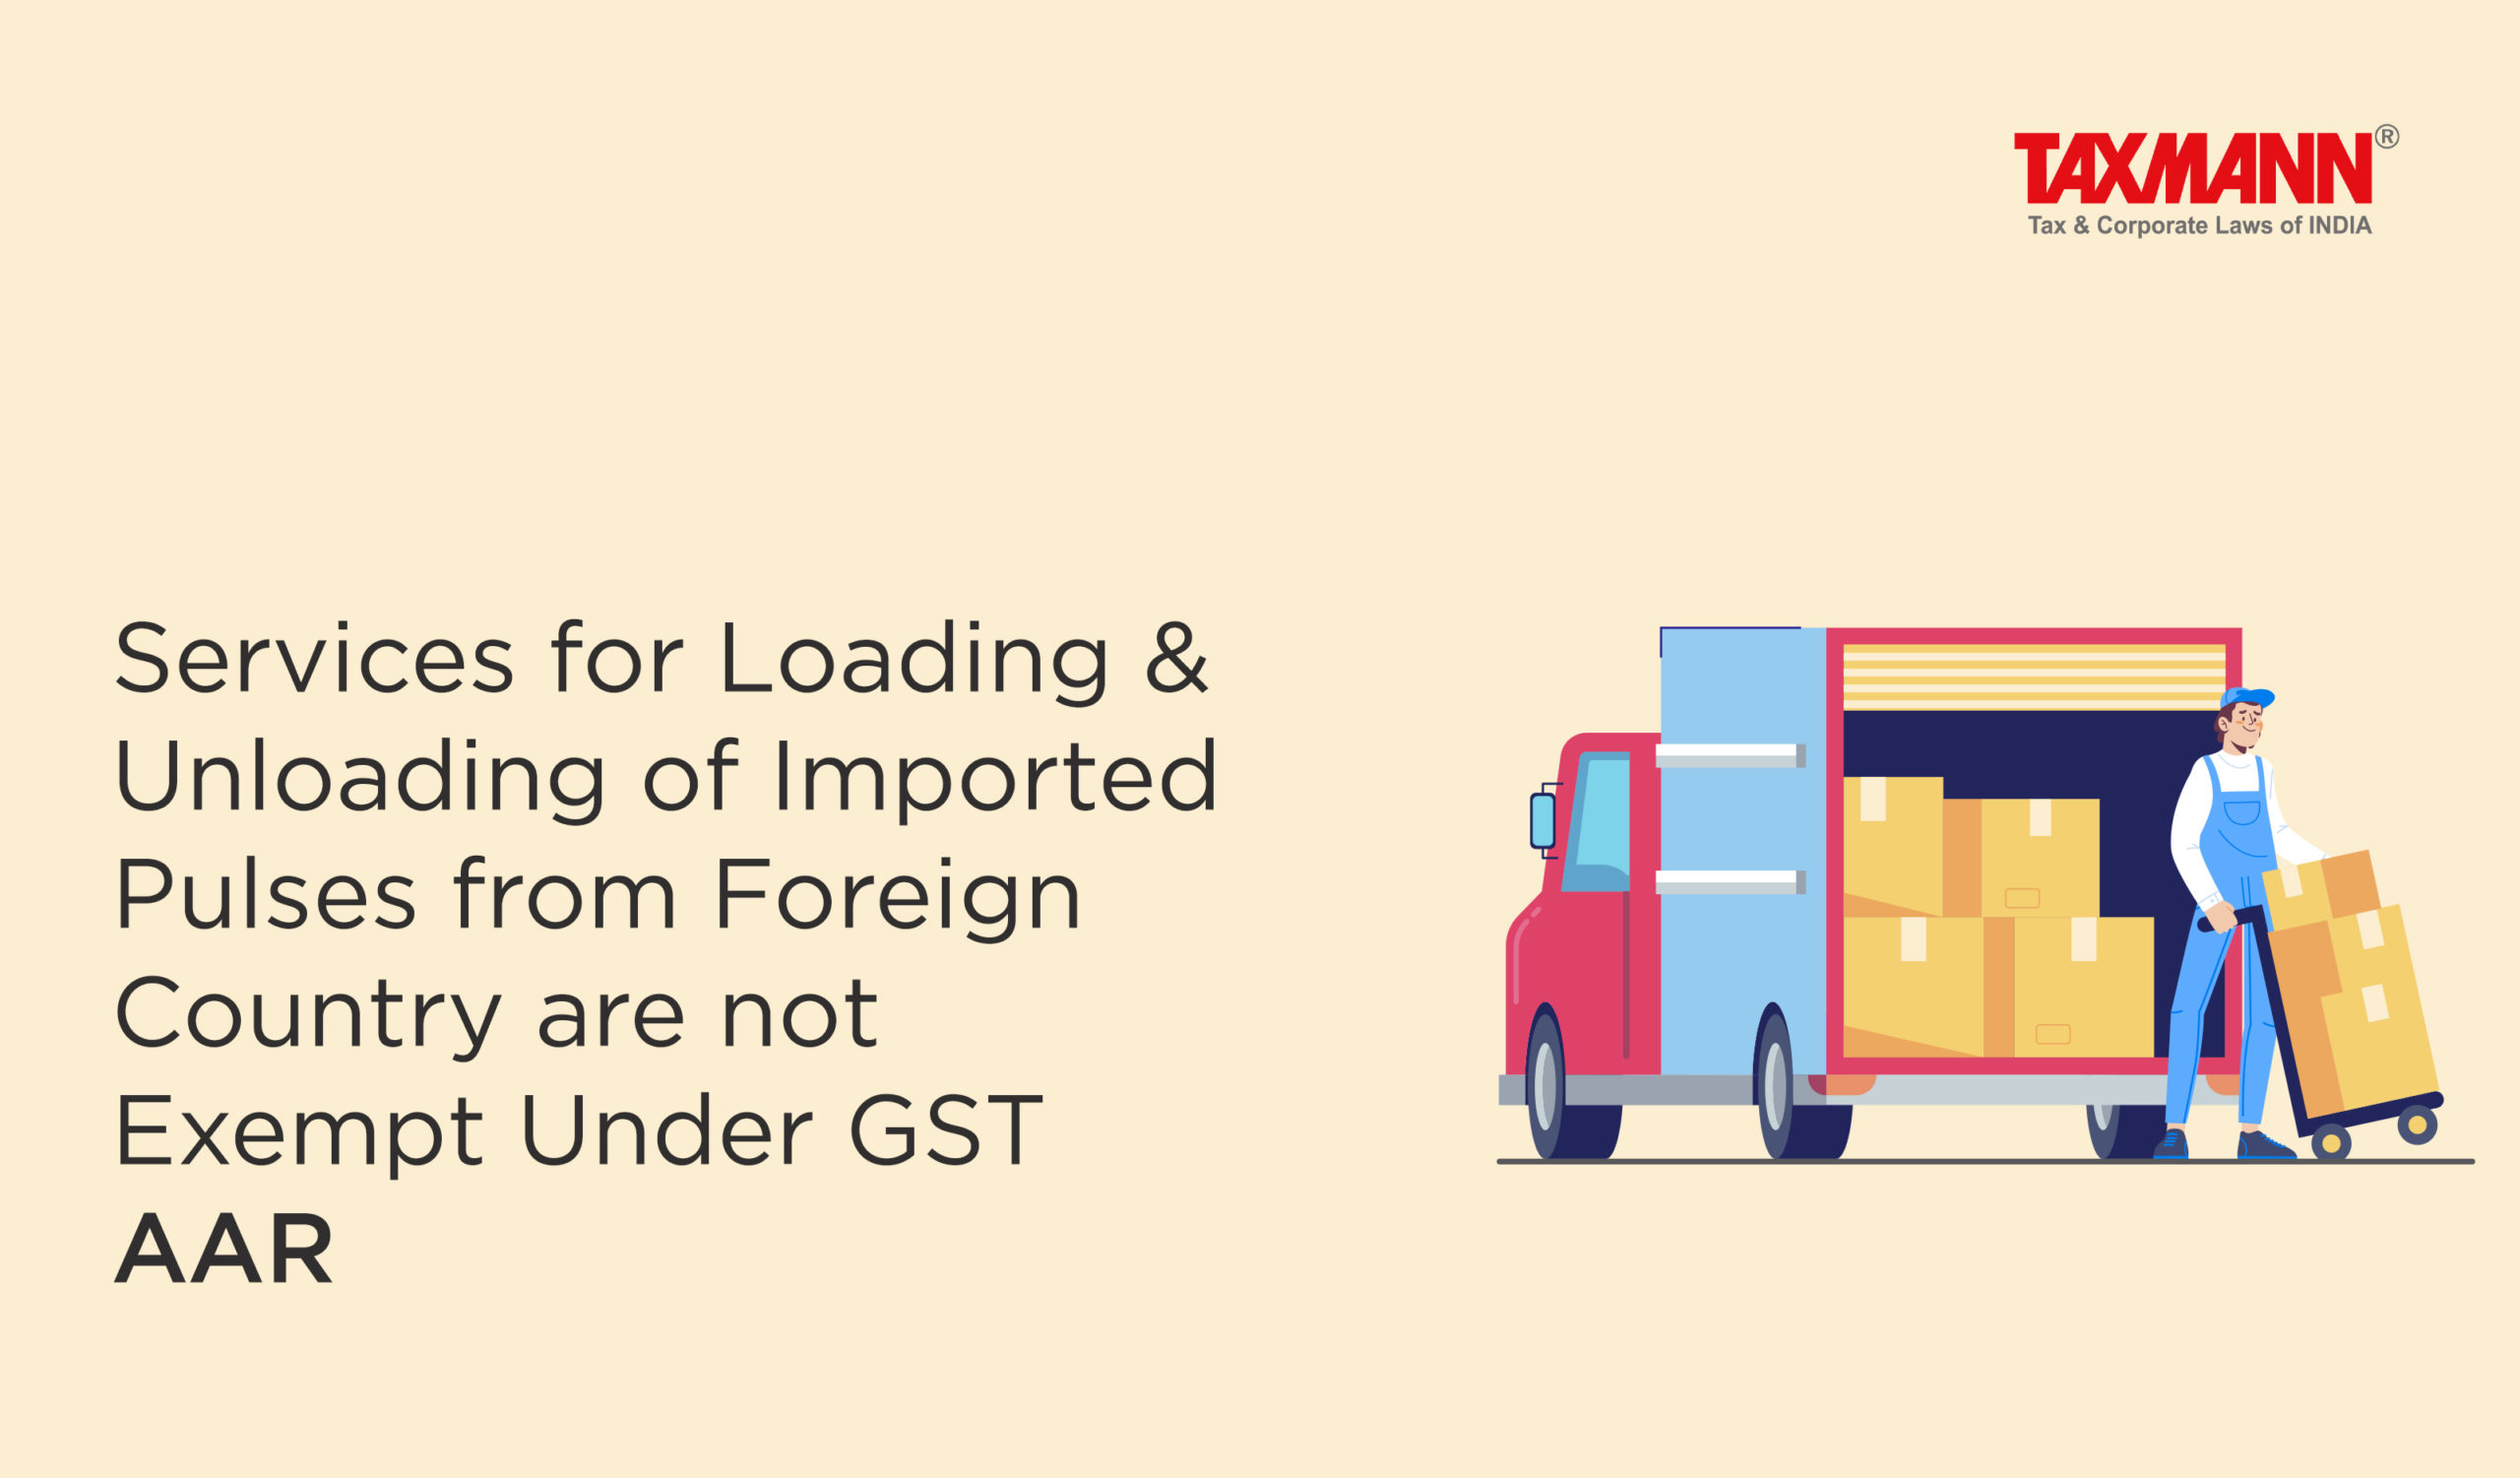 GST exemption on Loading & Unloading of Imported Pulses